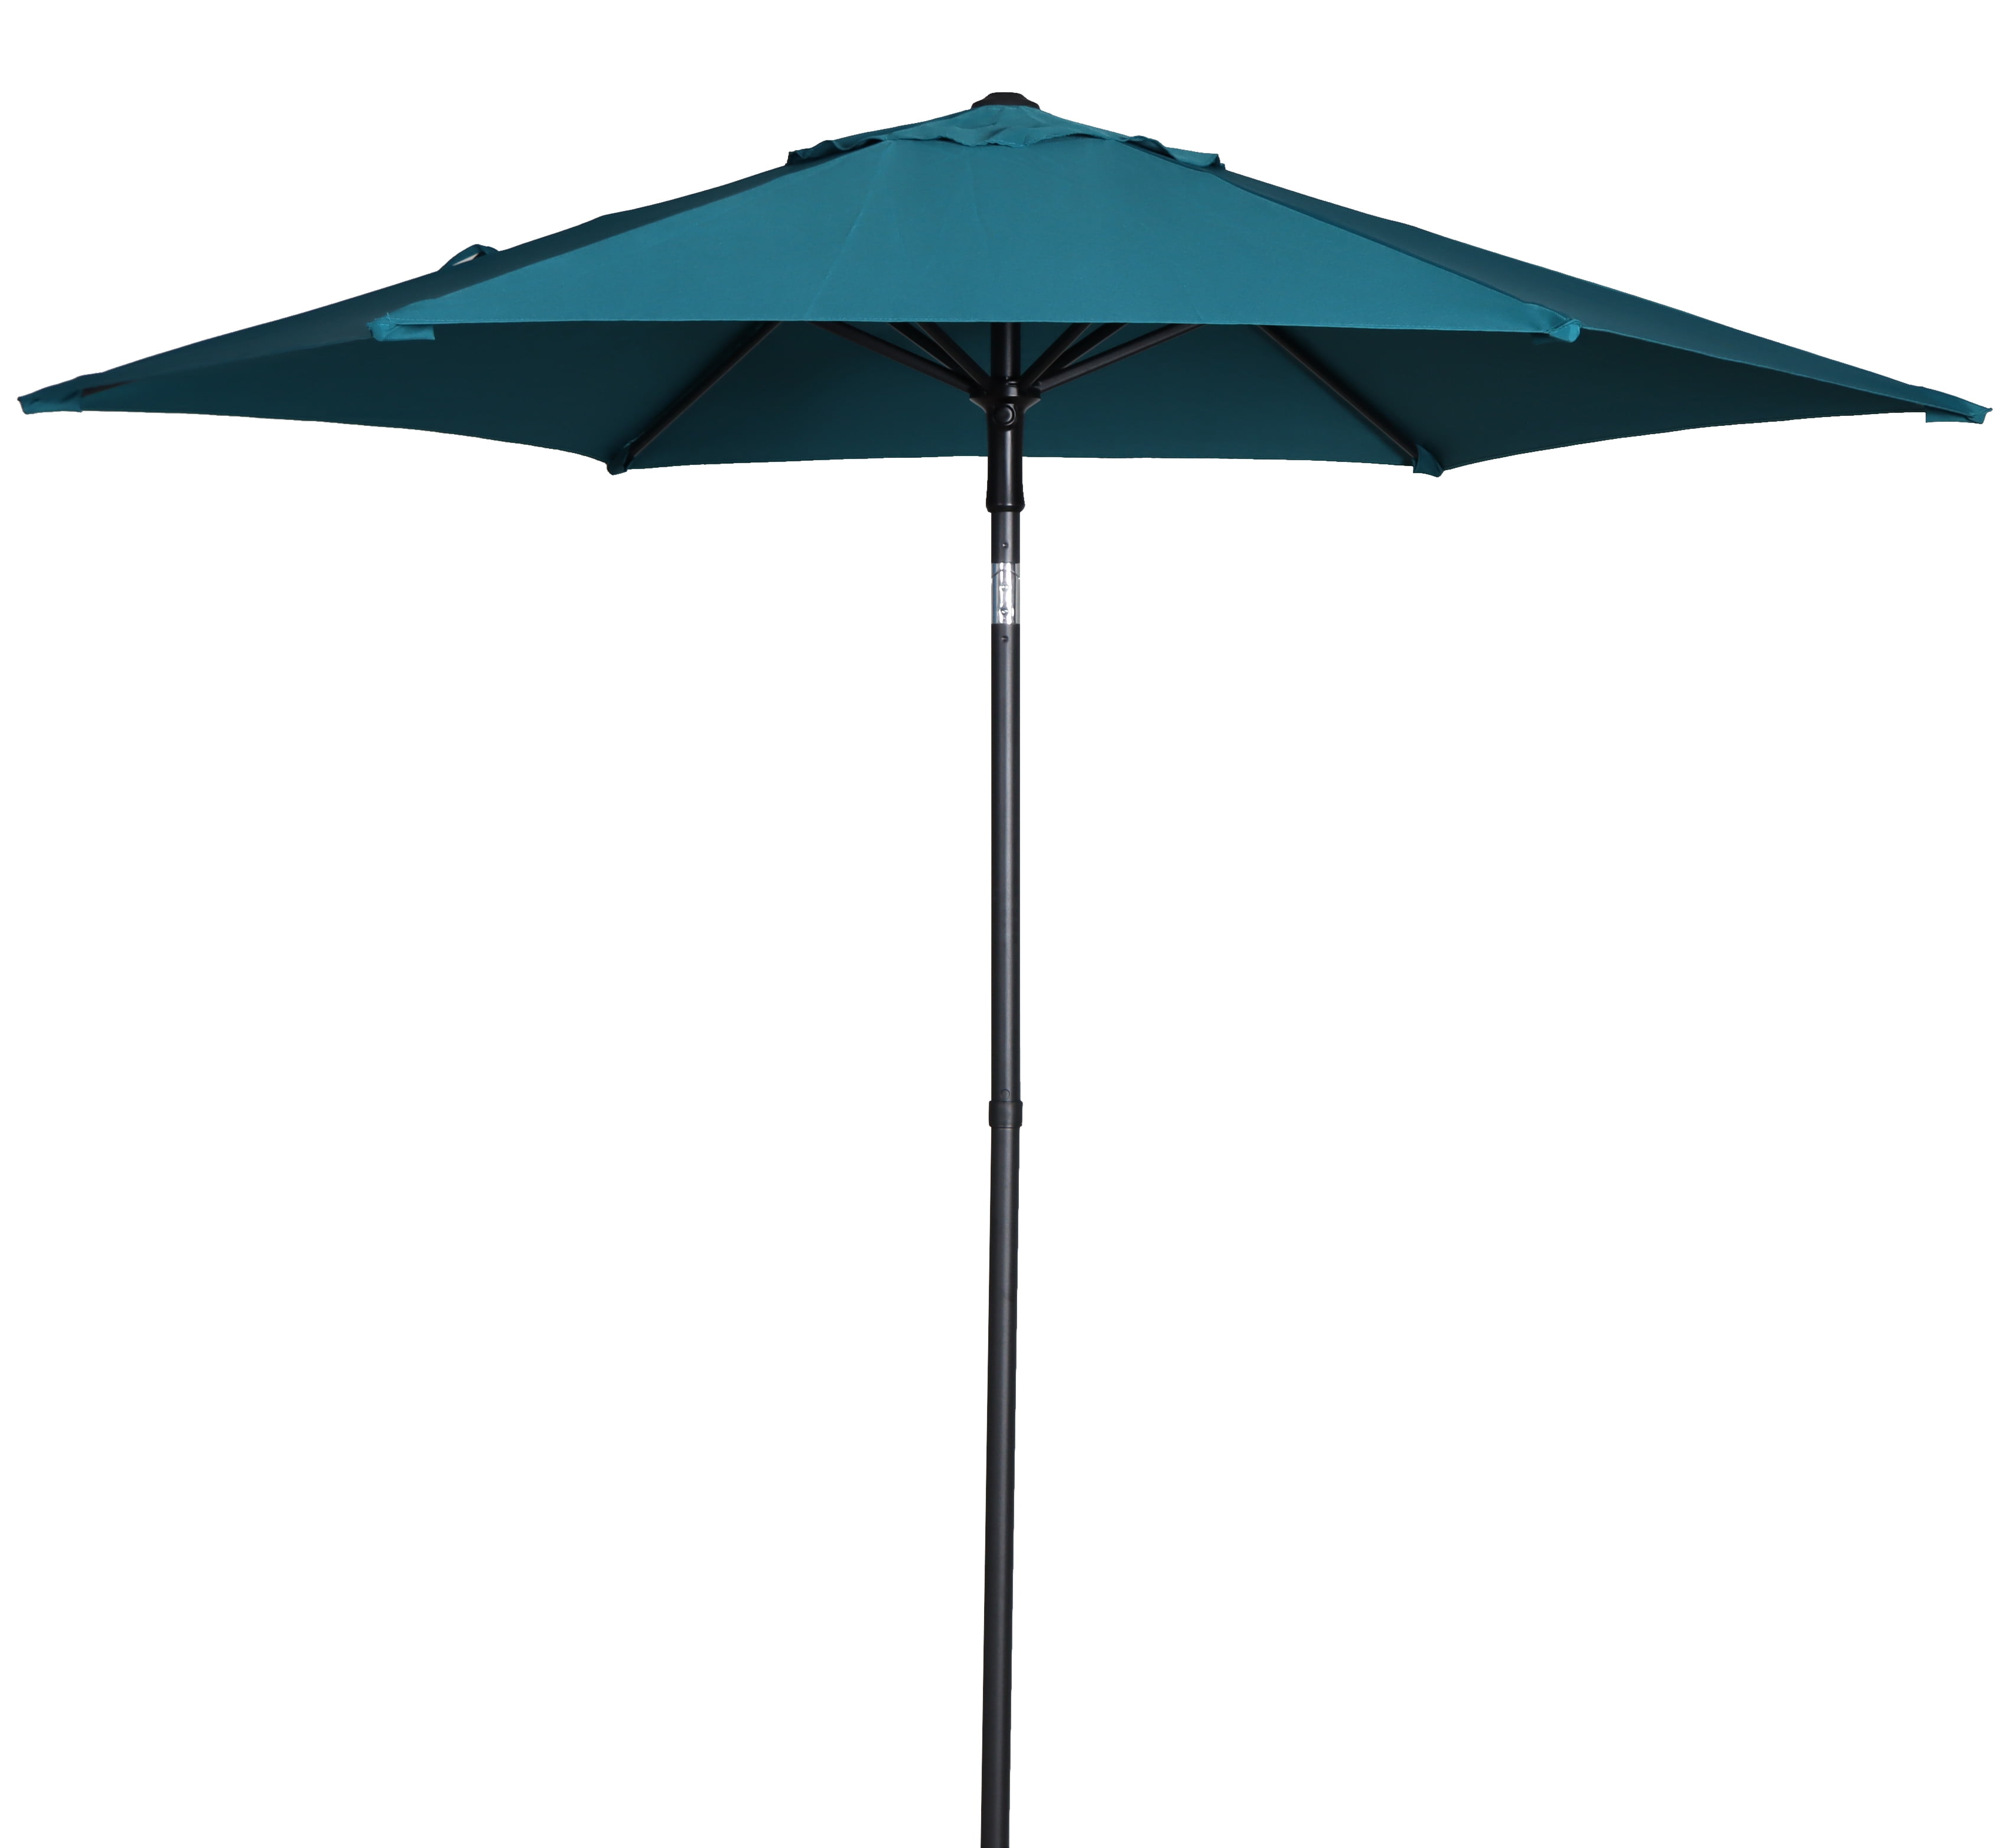 Mainstays 7.5ft Teal Round Outdoor Tilting Market Patio Umbrella with Push-up Function